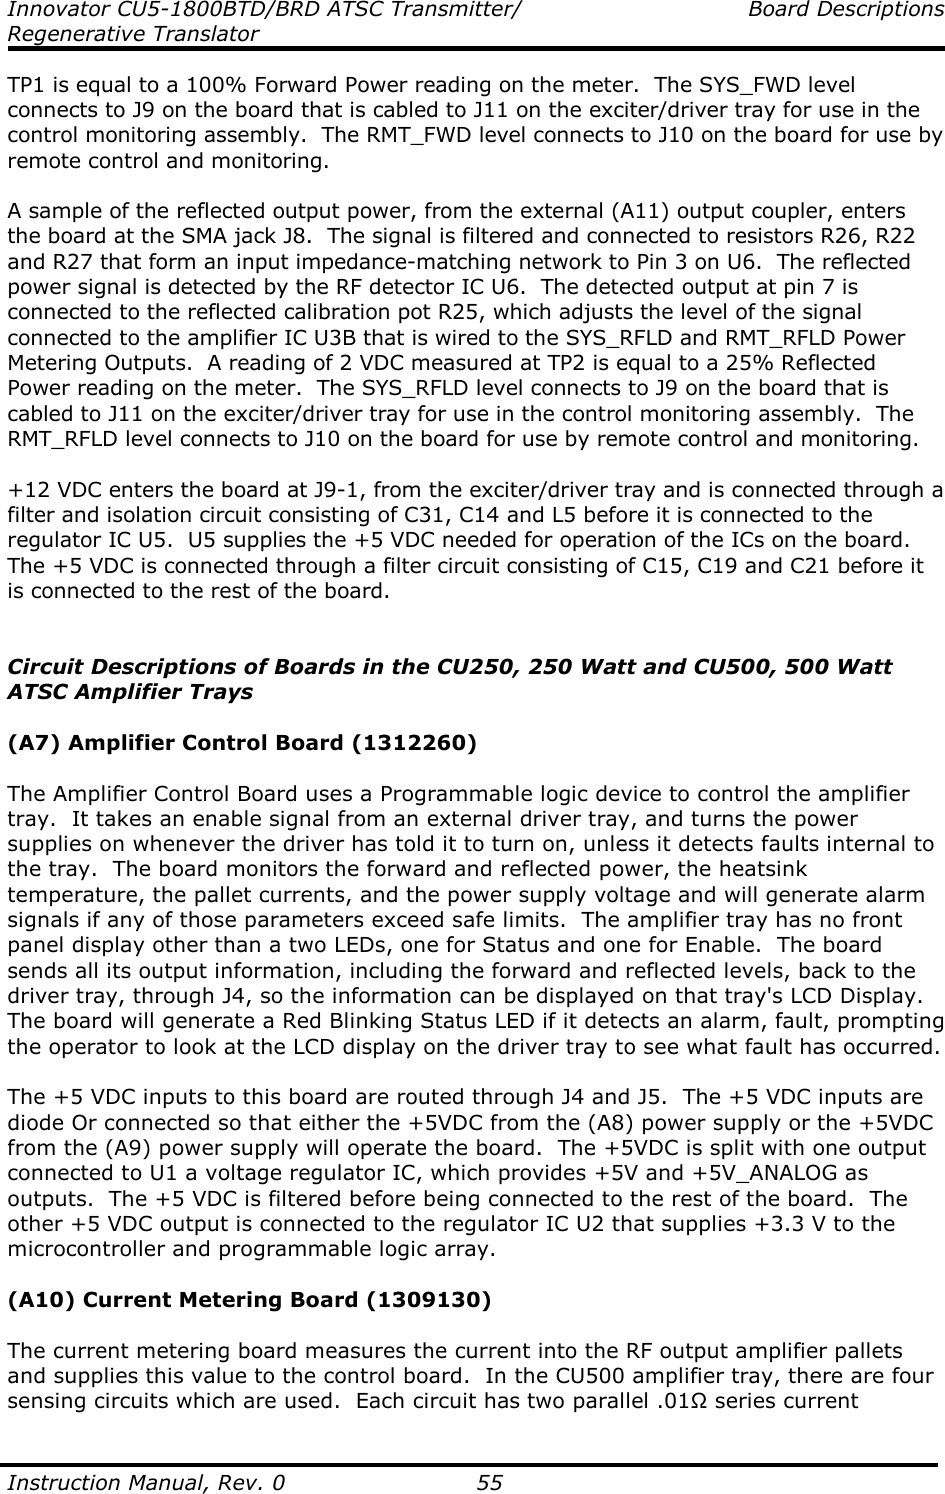 Innovator CU5-1800BTD/BRD ATSC Transmitter/  Board Descriptions Regenerative Translator  Instruction Manual, Rev. 0    55 TP1 is equal to a 100% Forward Power reading on the meter.  The SYS_FWD level connects to J9 on the board that is cabled to J11 on the exciter/driver tray for use in the control monitoring assembly.  The RMT_FWD level connects to J10 on the board for use by remote control and monitoring.  A sample of the reflected output power, from the external (A11) output coupler, enters the board at the SMA jack J8.  The signal is filtered and connected to resistors R26, R22 and R27 that form an input impedance-matching network to Pin 3 on U6.  The reflected power signal is detected by the RF detector IC U6.  The detected output at pin 7 is connected to the reflected calibration pot R25, which adjusts the level of the signal connected to the amplifier IC U3B that is wired to the SYS_RFLD and RMT_RFLD Power Metering Outputs.  A reading of 2 VDC measured at TP2 is equal to a 25% Reflected Power reading on the meter.  The SYS_RFLD level connects to J9 on the board that is cabled to J11 on the exciter/driver tray for use in the control monitoring assembly.  The RMT_RFLD level connects to J10 on the board for use by remote control and monitoring.  +12 VDC enters the board at J9-1, from the exciter/driver tray and is connected through a filter and isolation circuit consisting of C31, C14 and L5 before it is connected to the regulator IC U5.  U5 supplies the +5 VDC needed for operation of the ICs on the board.  The +5 VDC is connected through a filter circuit consisting of C15, C19 and C21 before it is connected to the rest of the board.   Circuit Descriptions of Boards in the CU250, 250 Watt and CU500, 500 Watt ATSC Amplifier Trays  (A7) Amplifier Control Board (1312260)  The Amplifier Control Board uses a Programmable logic device to control the amplifier tray.  It takes an enable signal from an external driver tray, and turns the power supplies on whenever the driver has told it to turn on, unless it detects faults internal to the tray.  The board monitors the forward and reflected power, the heatsink temperature, the pallet currents, and the power supply voltage and will generate alarm signals if any of those parameters exceed safe limits.  The amplifier tray has no front panel display other than a two LEDs, one for Status and one for Enable.  The board sends all its output information, including the forward and reflected levels, back to the driver tray, through J4, so the information can be displayed on that tray&apos;s LCD Display.  The board will generate a Red Blinking Status LED if it detects an alarm, fault, prompting the operator to look at the LCD display on the driver tray to see what fault has occurred.  The +5 VDC inputs to this board are routed through J4 and J5.  The +5 VDC inputs are diode Or connected so that either the +5VDC from the (A8) power supply or the +5VDC from the (A9) power supply will operate the board.  The +5VDC is split with one output connected to U1 a voltage regulator IC, which provides +5V and +5V_ANALOG as outputs.  The +5 VDC is filtered before being connected to the rest of the board.  The other +5 VDC output is connected to the regulator IC U2 that supplies +3.3 V to the microcontroller and programmable logic array.  (A10) Current Metering Board (1309130)  The current metering board measures the current into the RF output amplifier pallets and supplies this value to the control board.  In the CU500 amplifier tray, there are four sensing circuits which are used.  Each circuit has two parallel .01Ω series current 